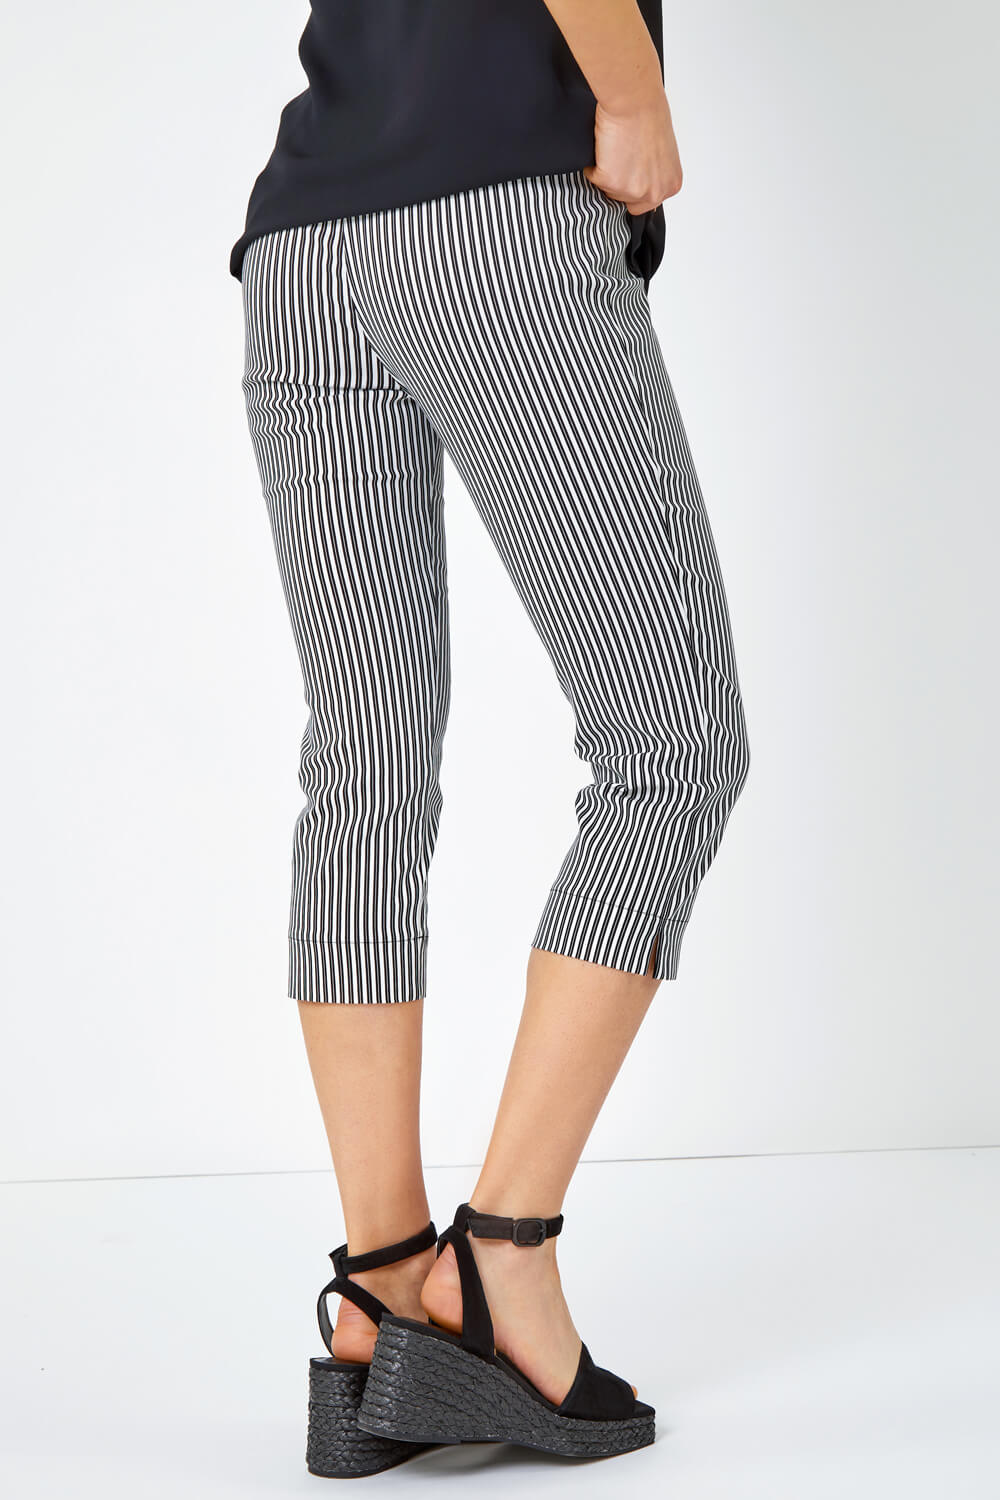 Black Striped Cropped Stretch Trouser, Image 4 of 5